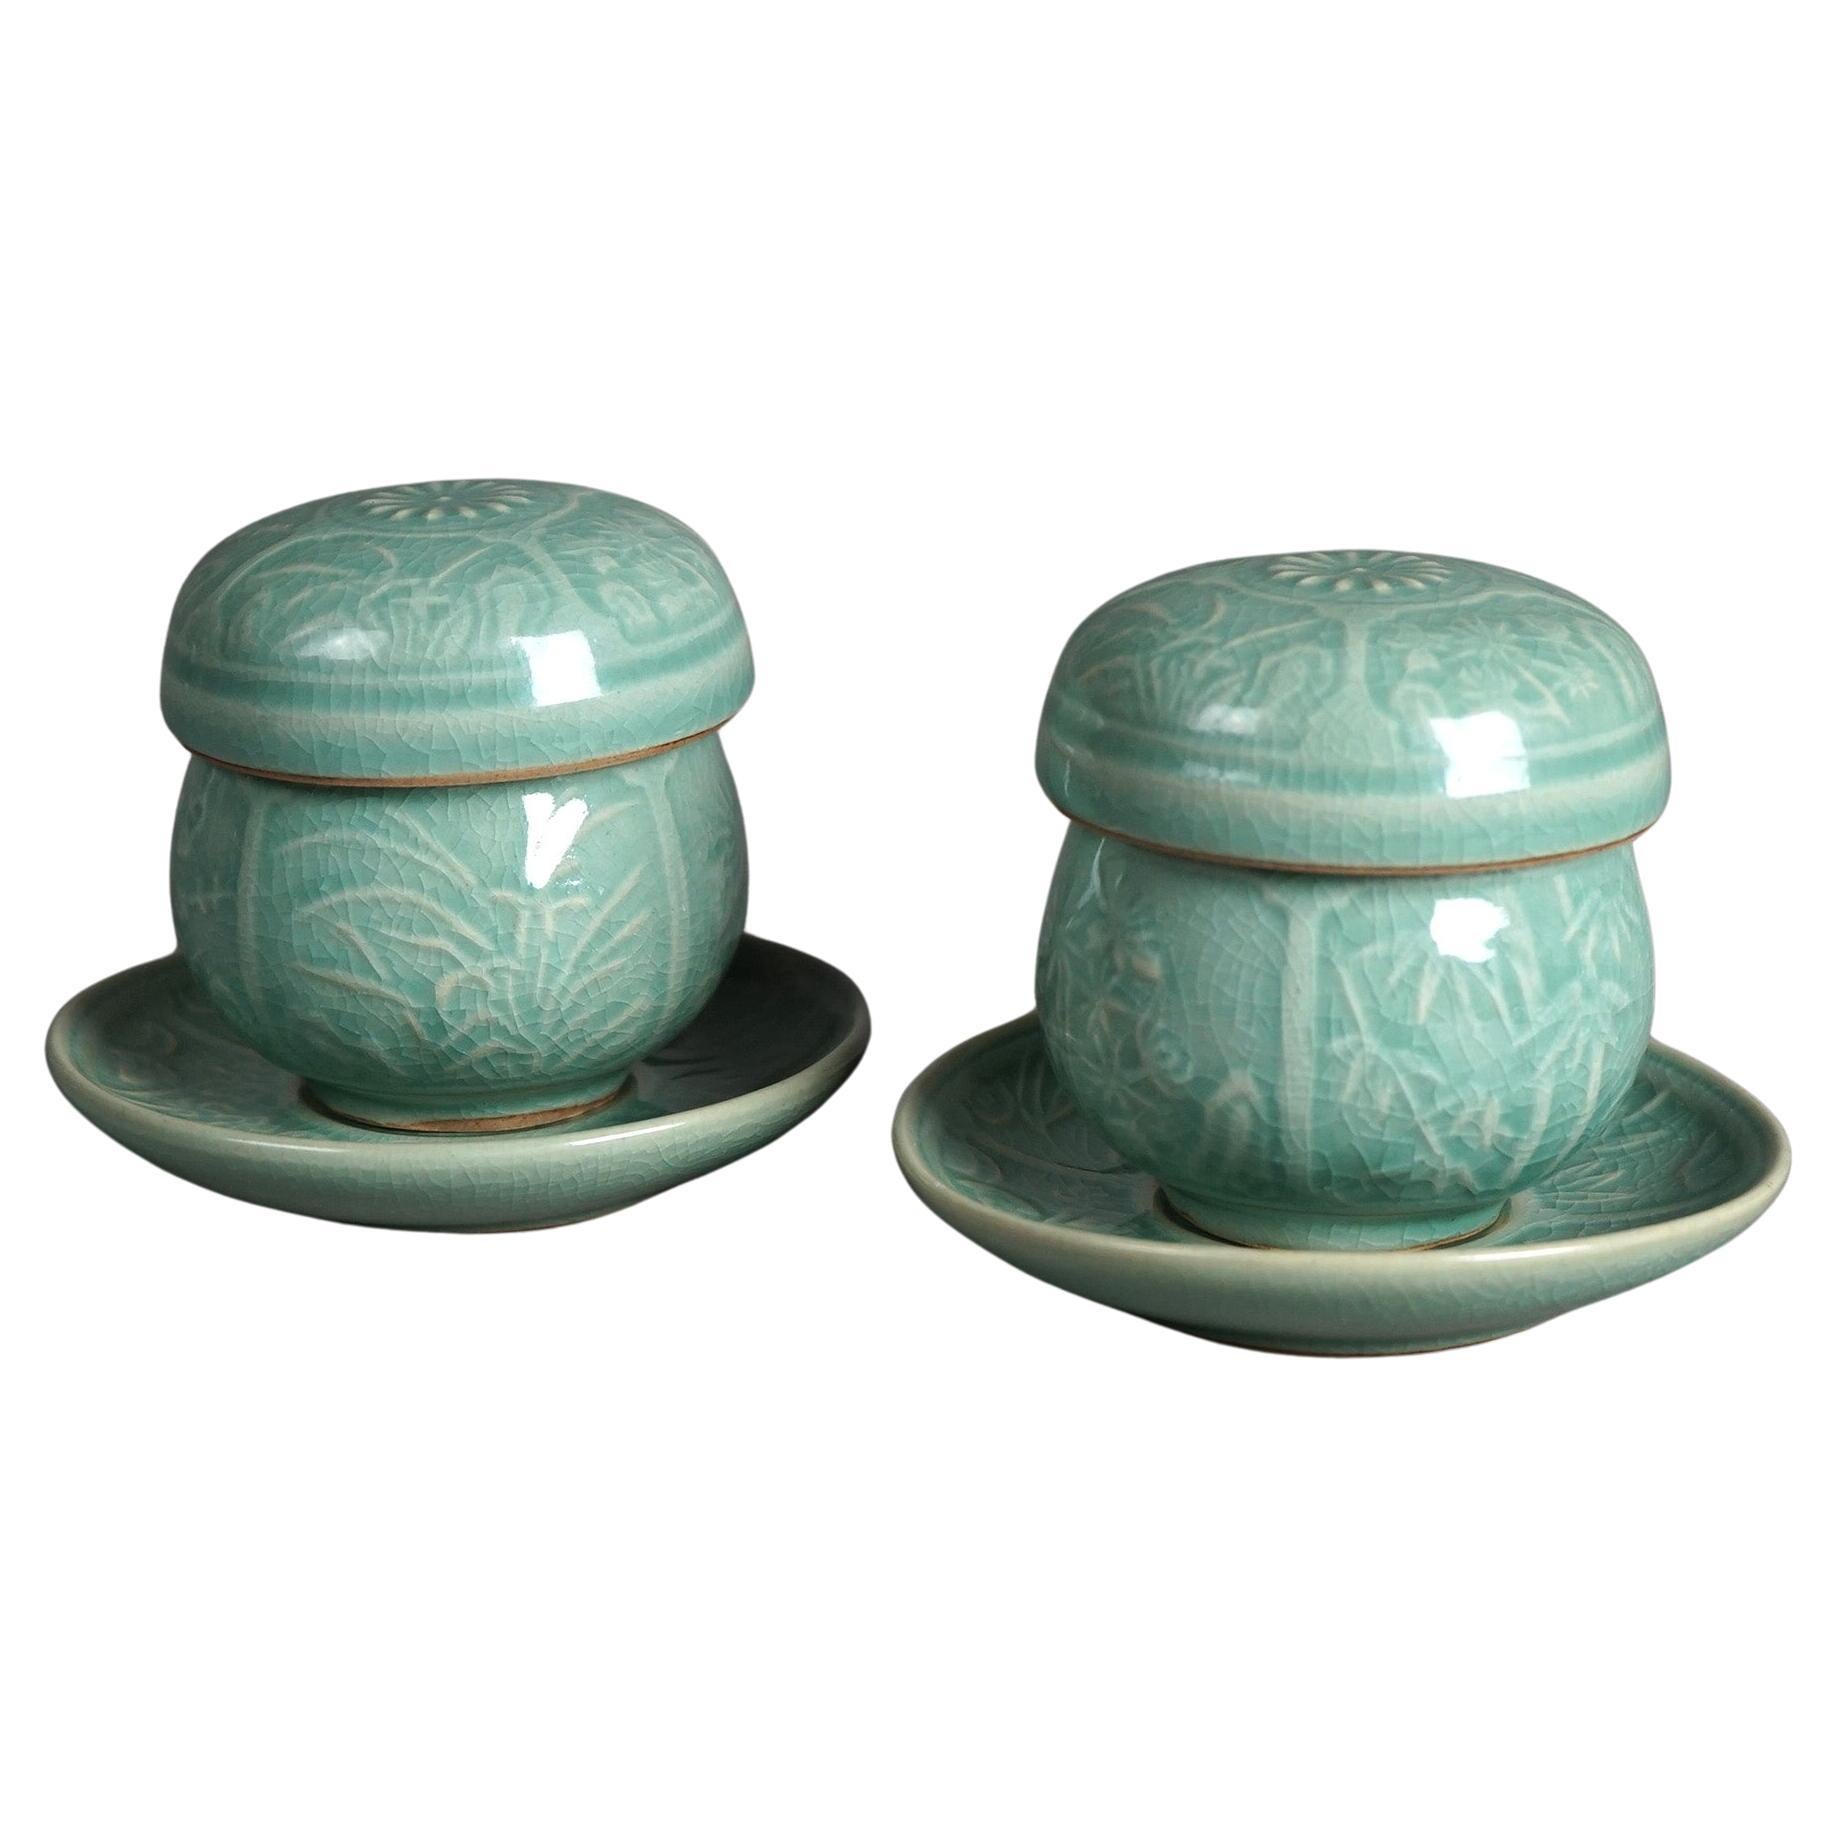 Pair of Antique Chinese Celadon Stamped Teacups with Inserts C1930 For Sale